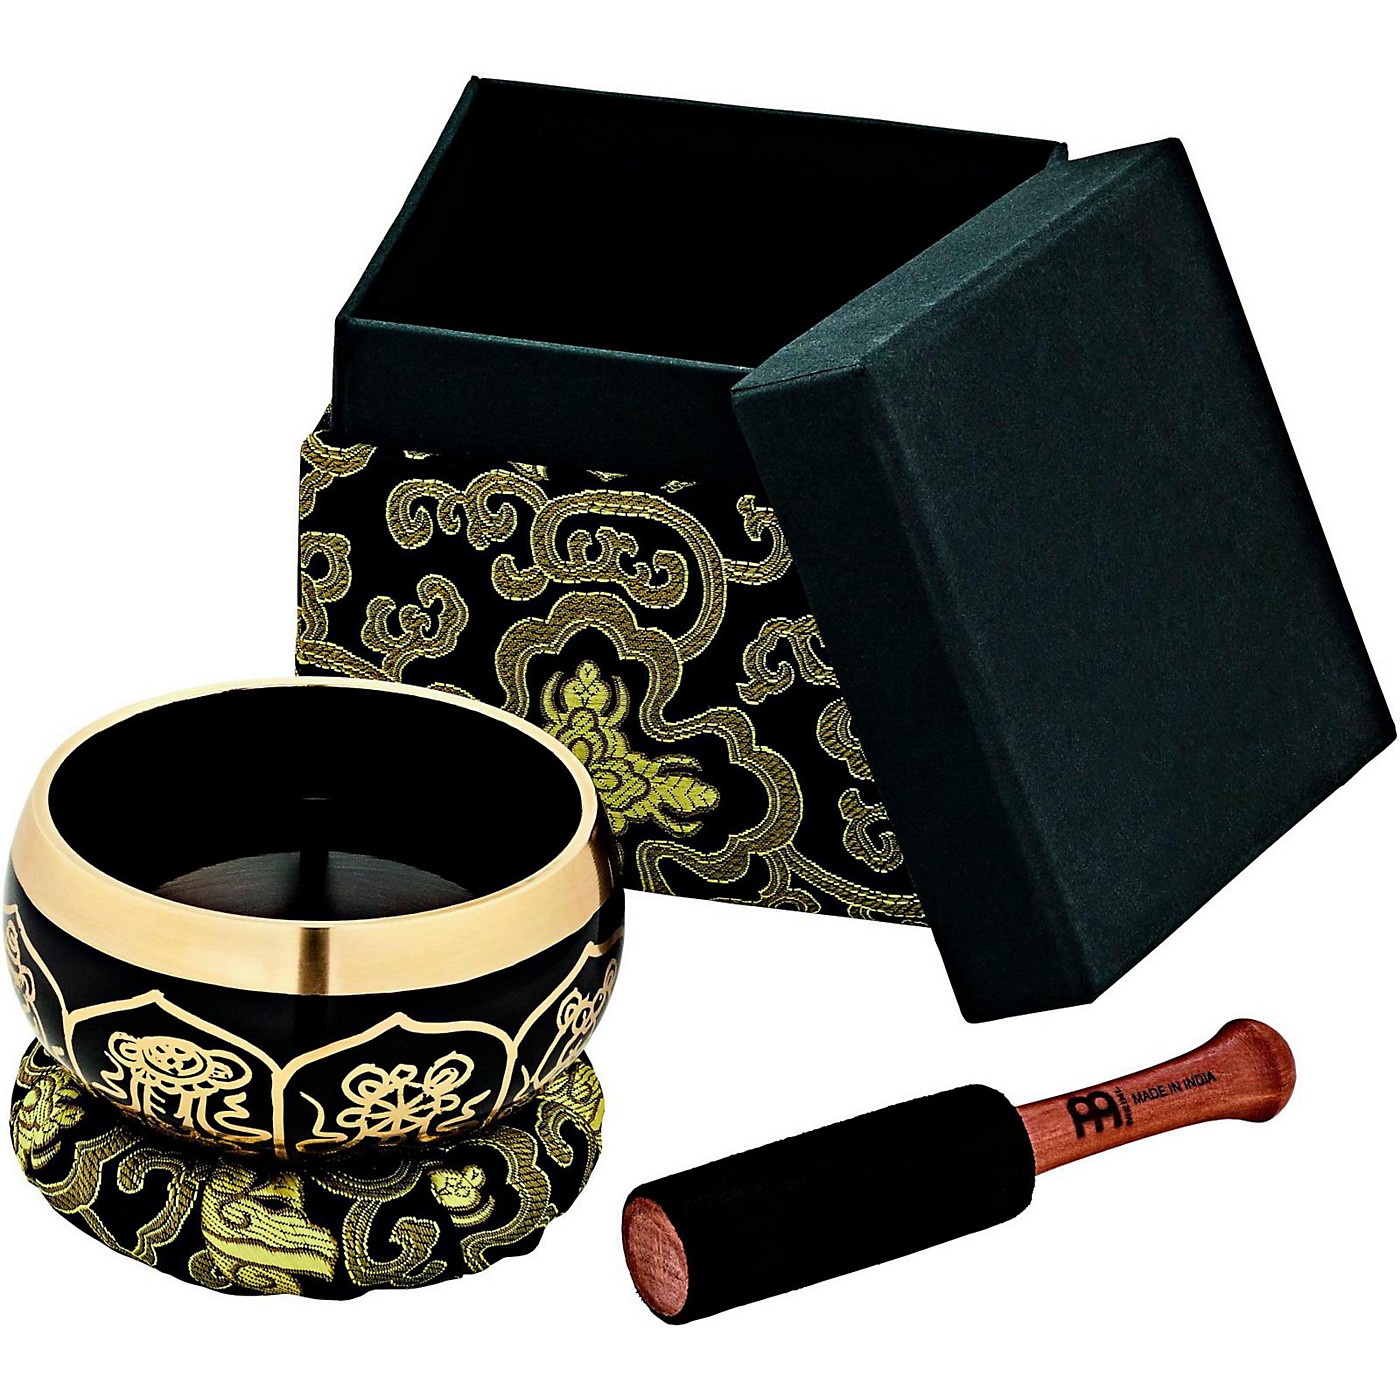 MEINL Sonic Energy Ornamental Series Singing Bowl with Mallet, Cushion Ring, and Display Box, 10.5cm thumbnail